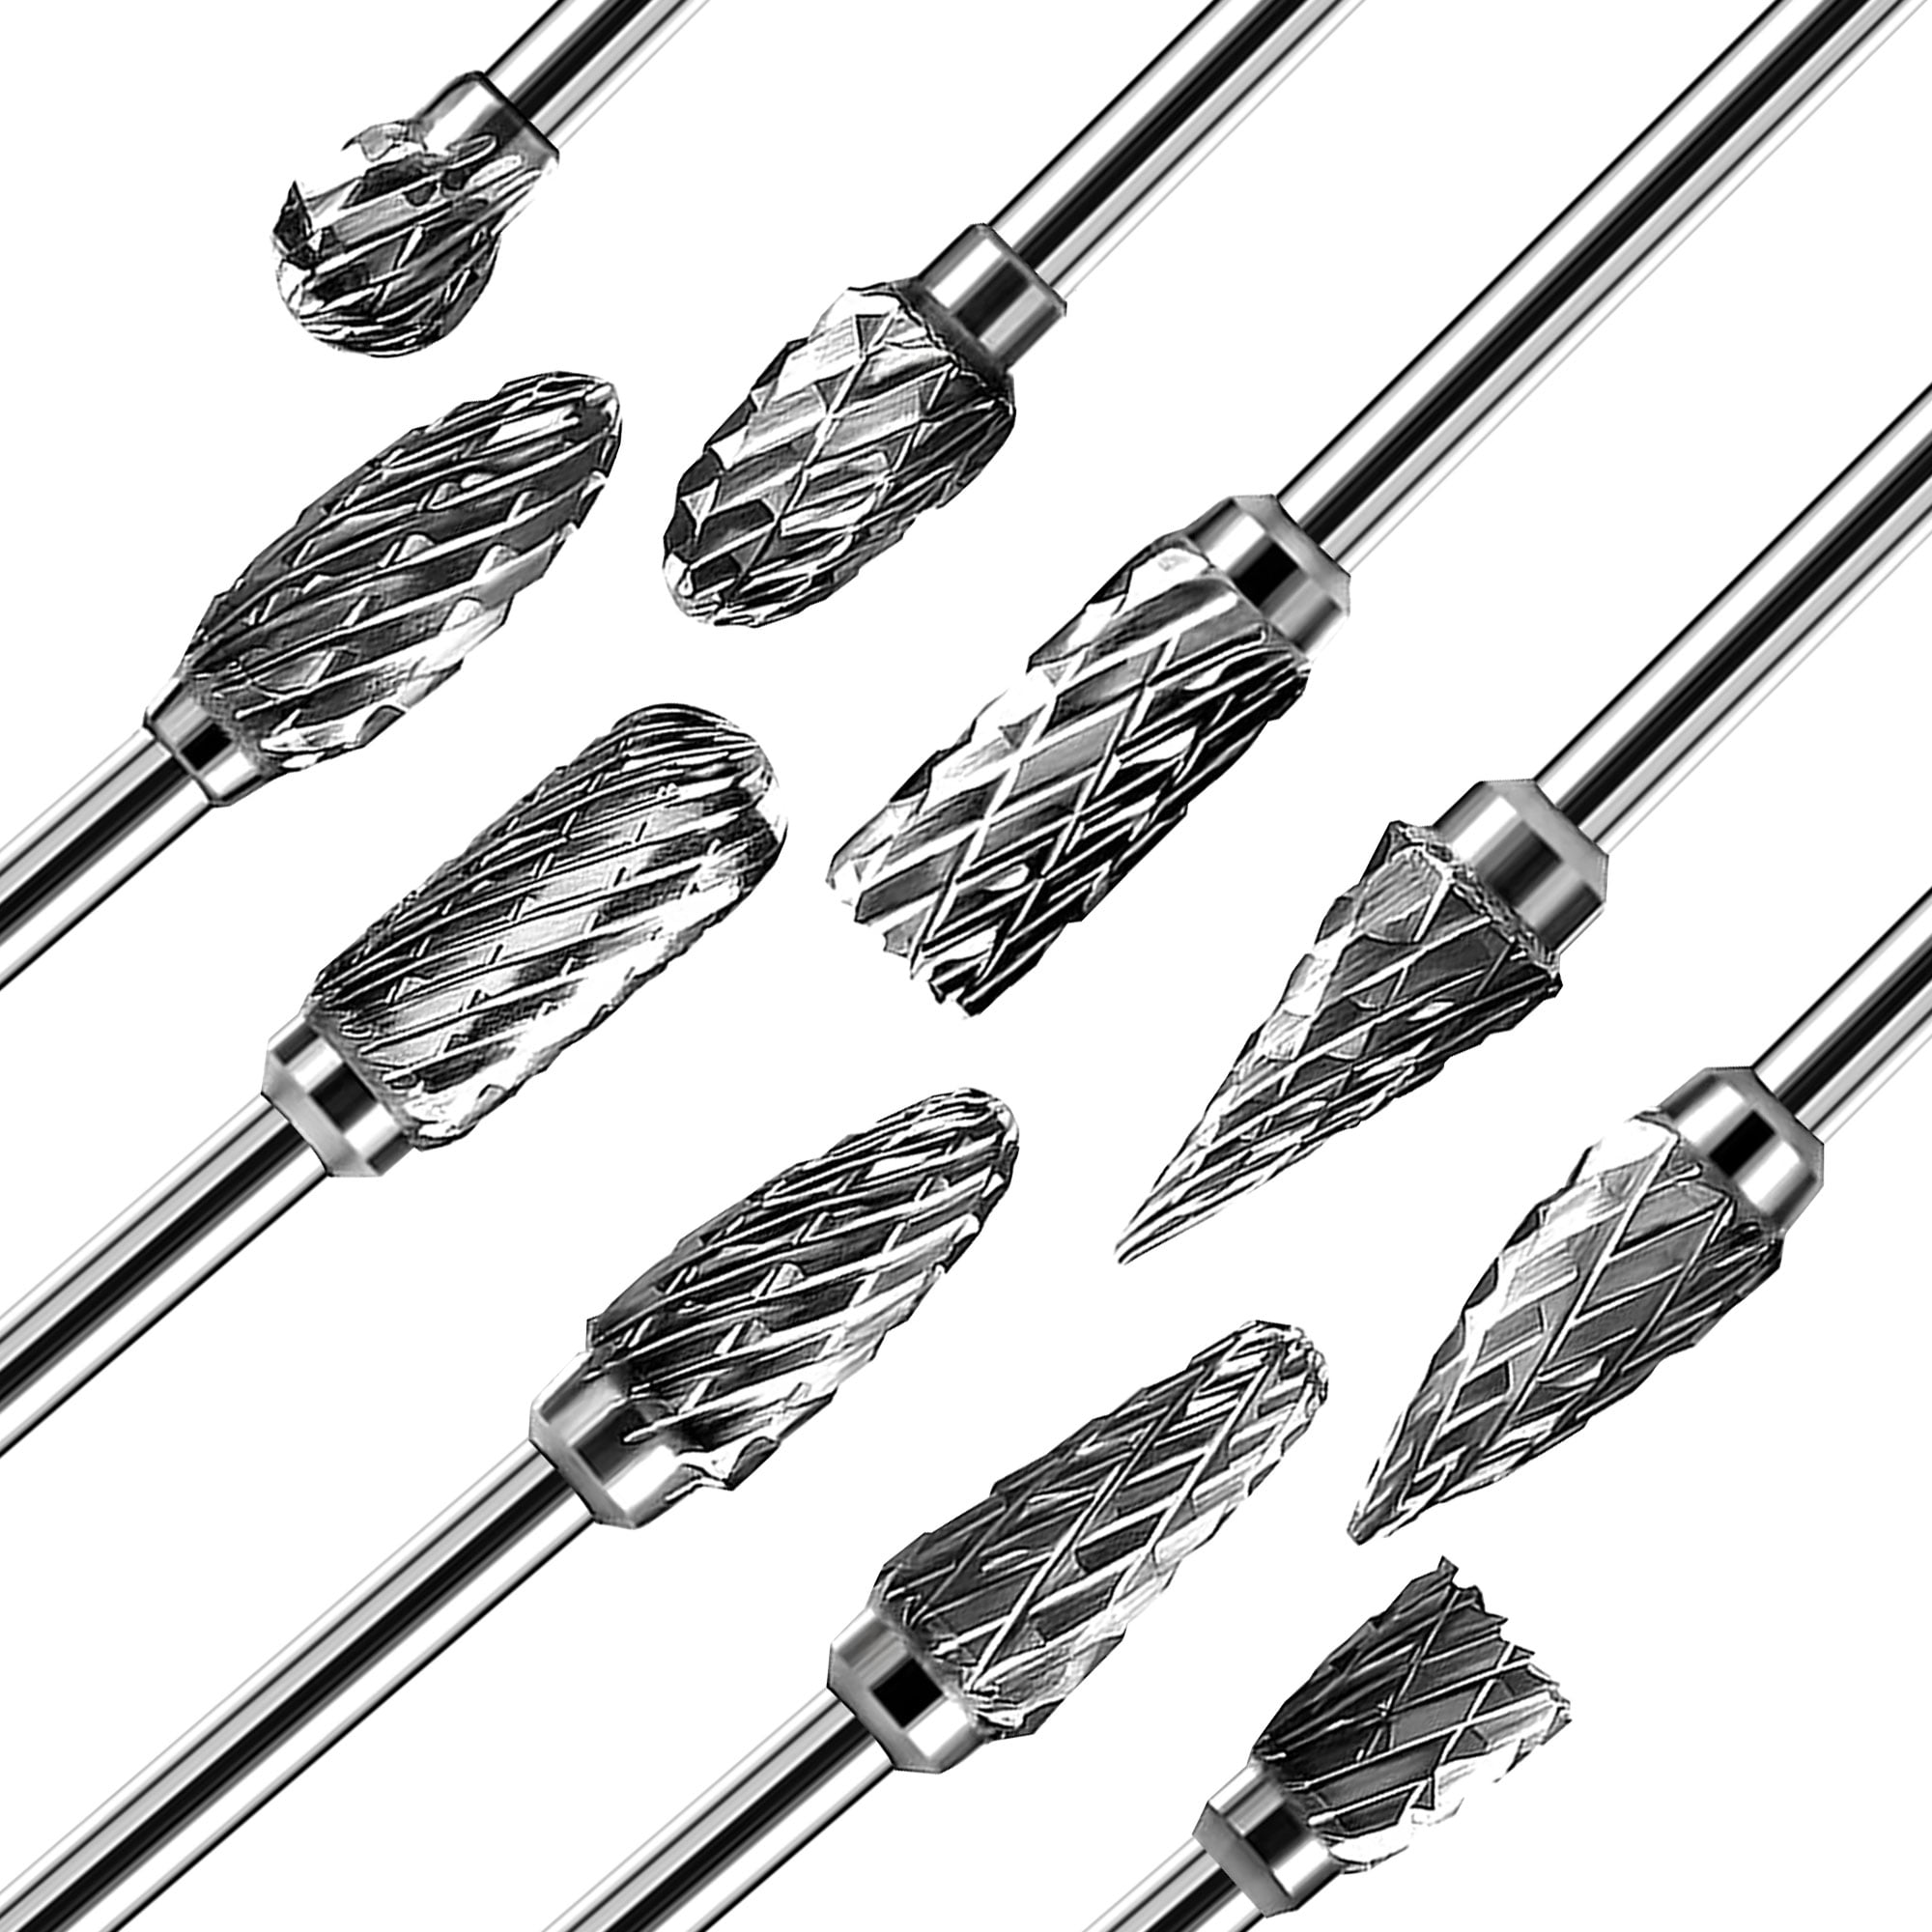 10pcs Carbide Burr Set Alloy Tungsten Steel High Hardness Wide Application  For Dremel Wood Carving Bits For Woodworking